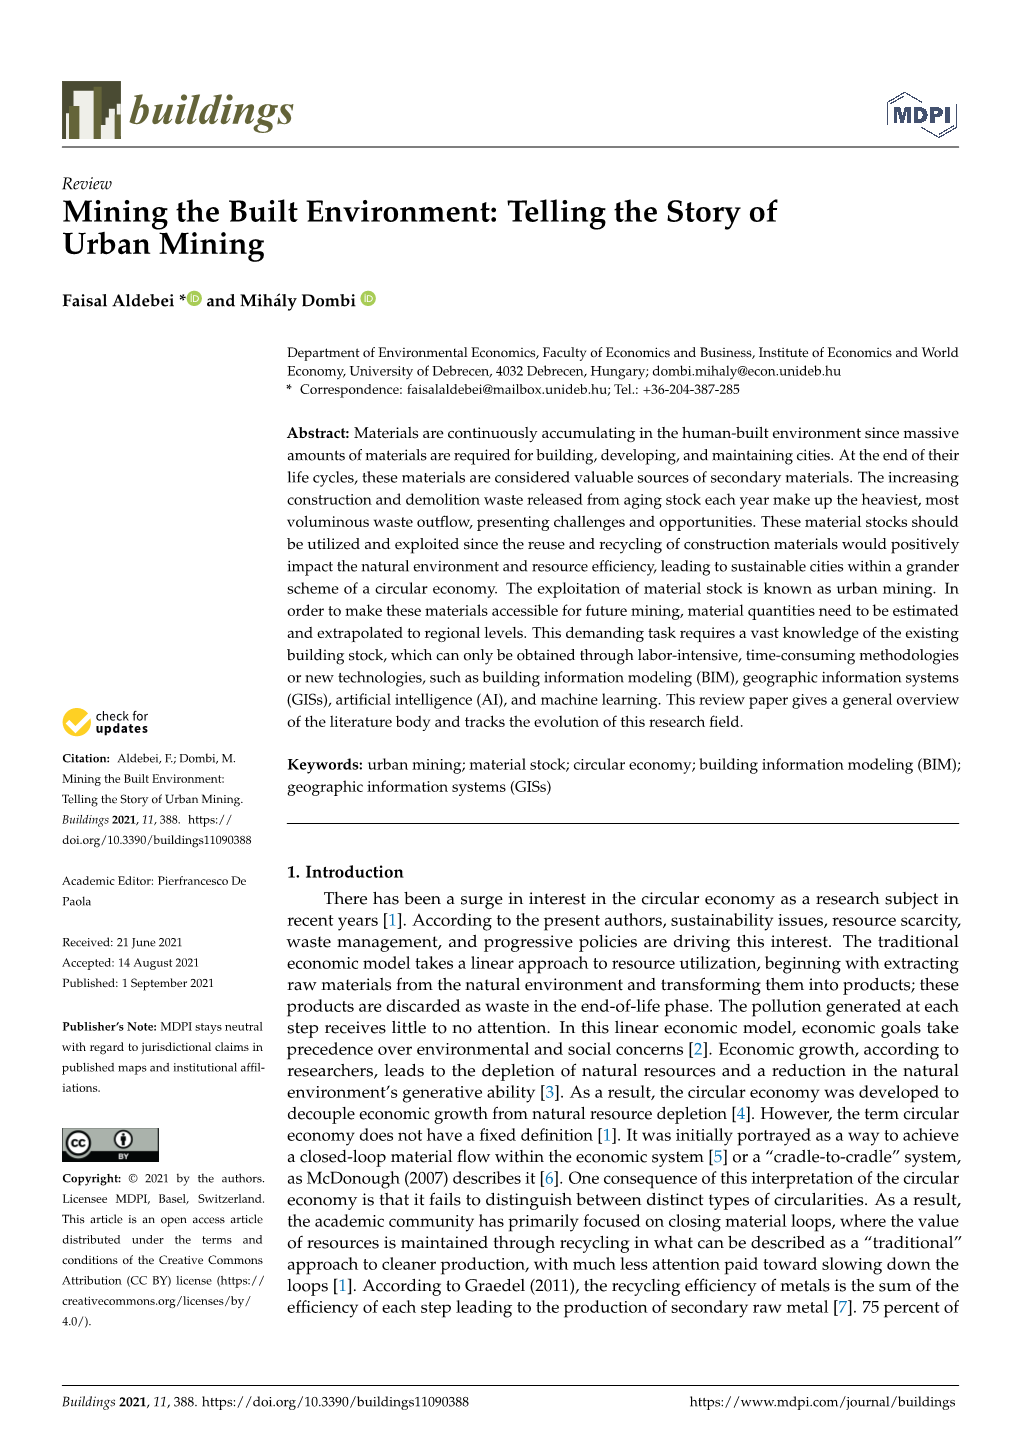 Mining the Built Environment: Telling the Story of Urban Mining